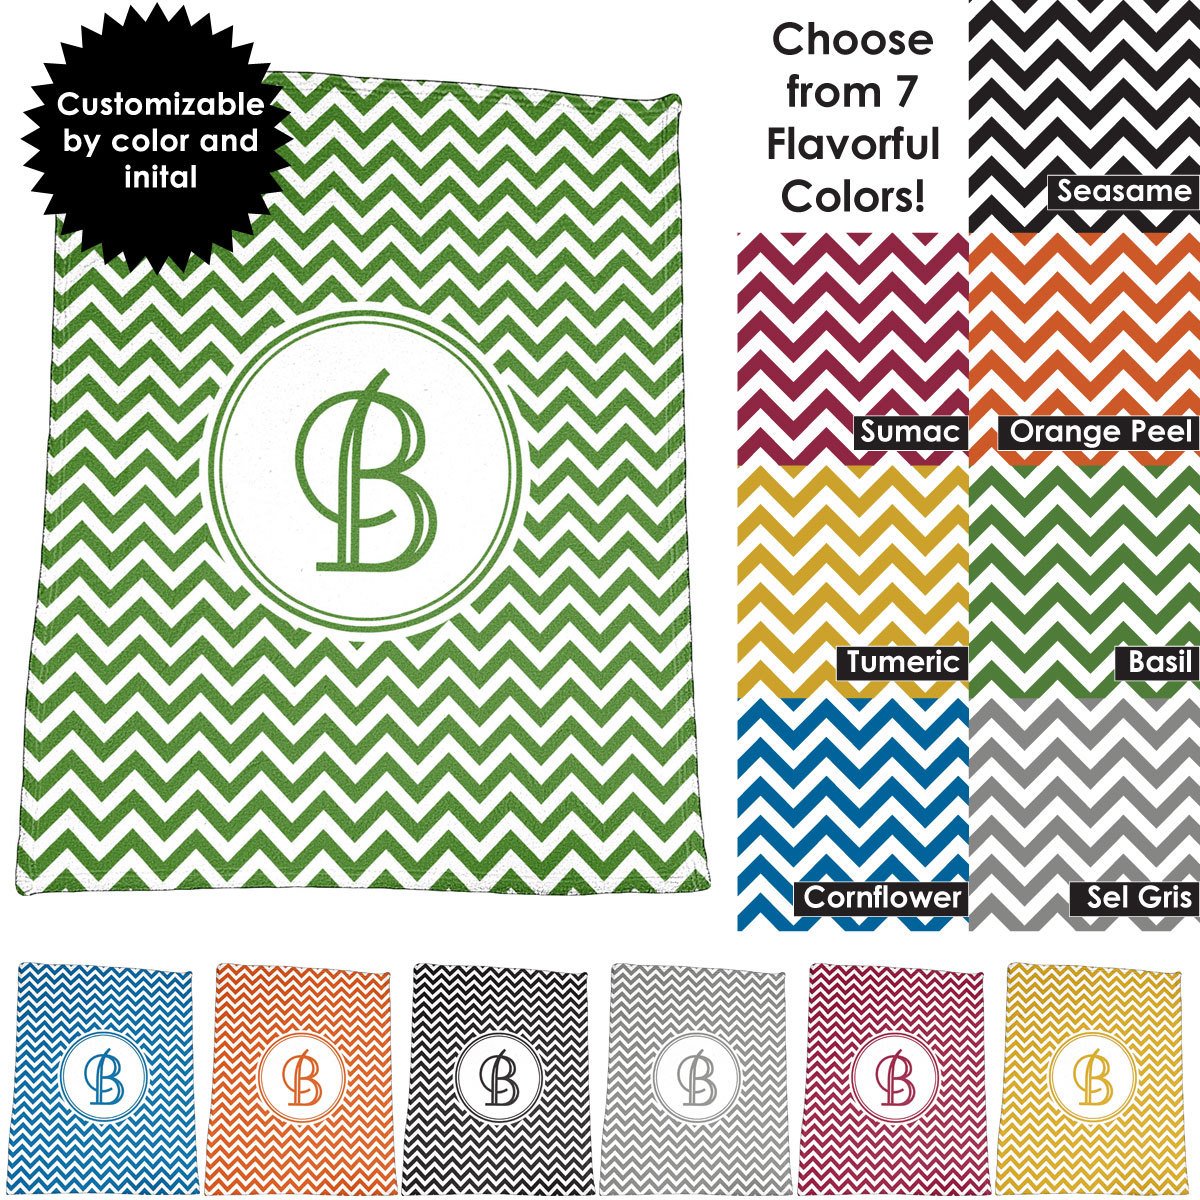 Chevron Design 50" x 60" Plush Throw Blanket / Tapestry Wall Hanging with Personalized Monogram